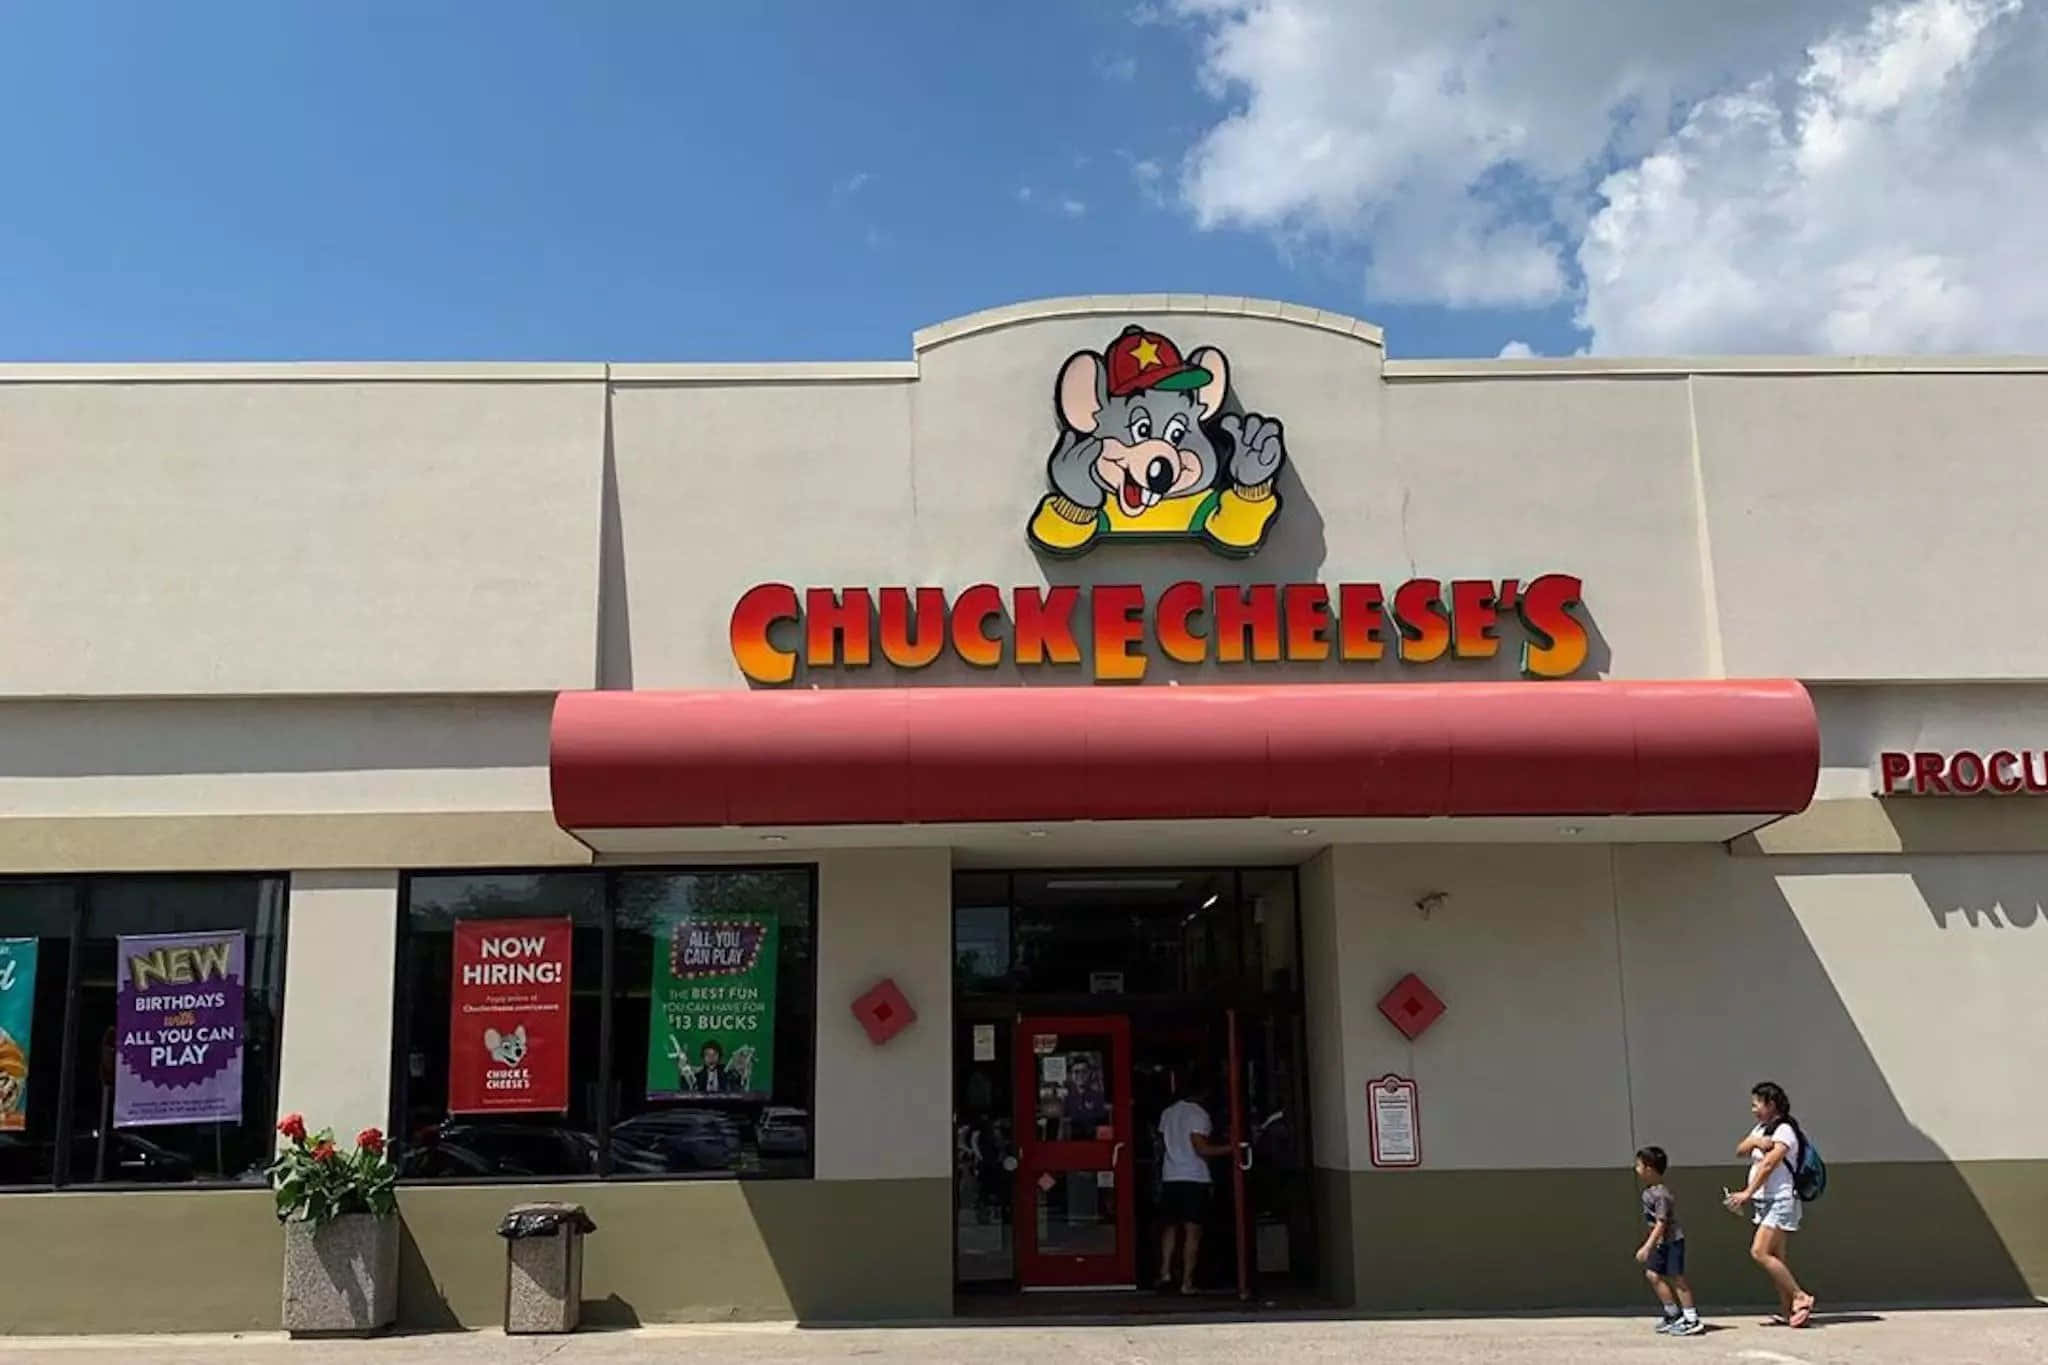 "Bring Fun and Joy to the Family with Chuck E Cheese!"